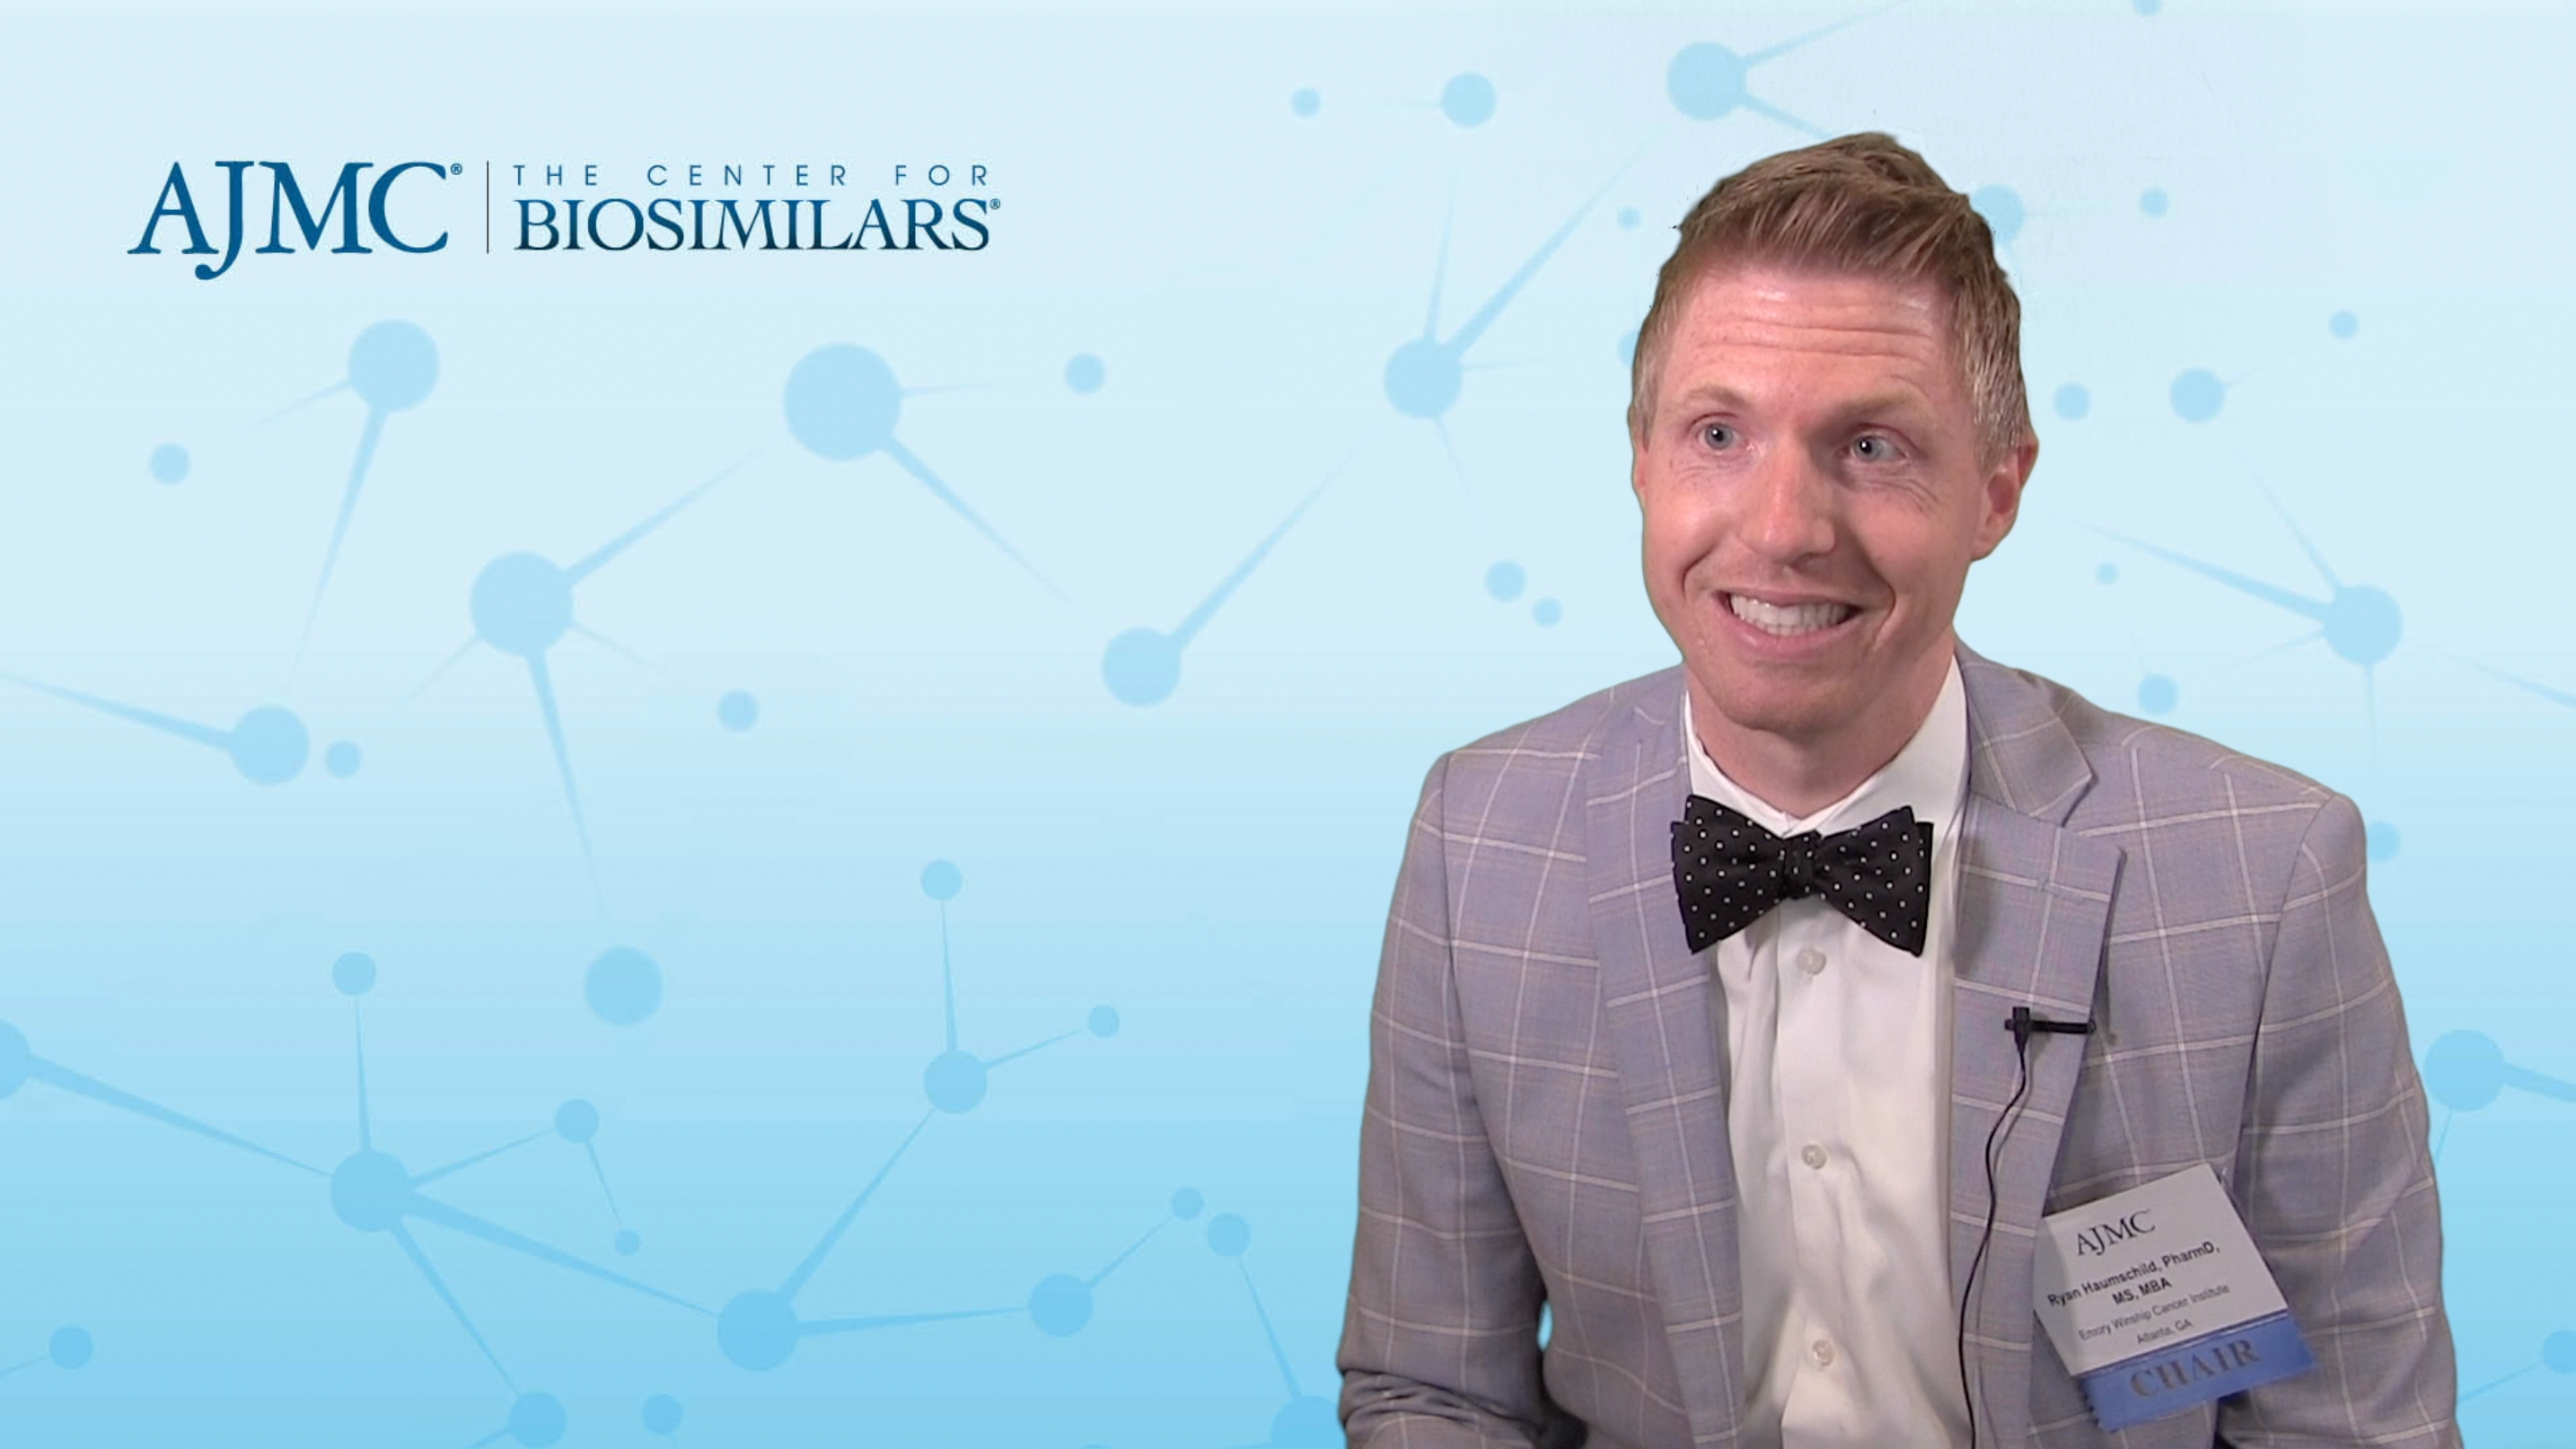 Dr Ryan Haumschild Compares Viewpoints on Biosimilar Value Between Stakeholders